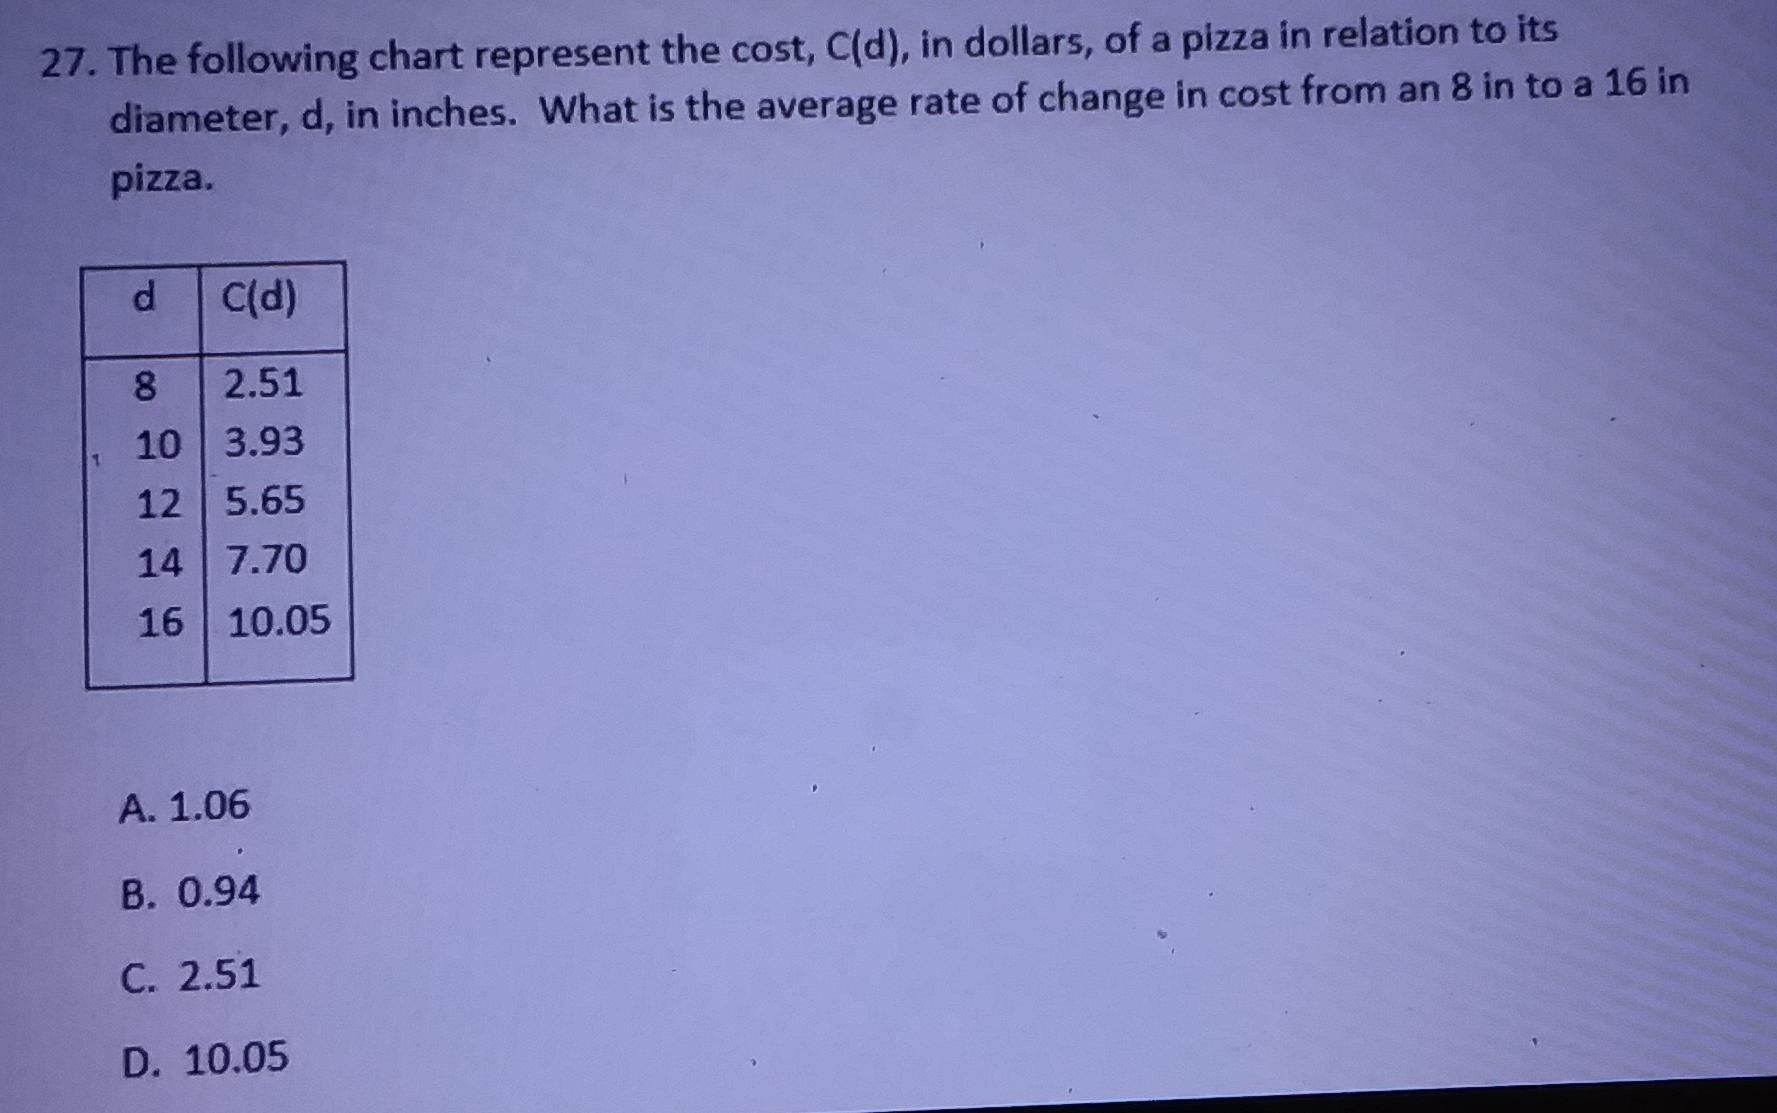 27. The Following Chart Represent The Cost, Cd), In Dollars, Of A Pizza In Relation To Its Diameter,